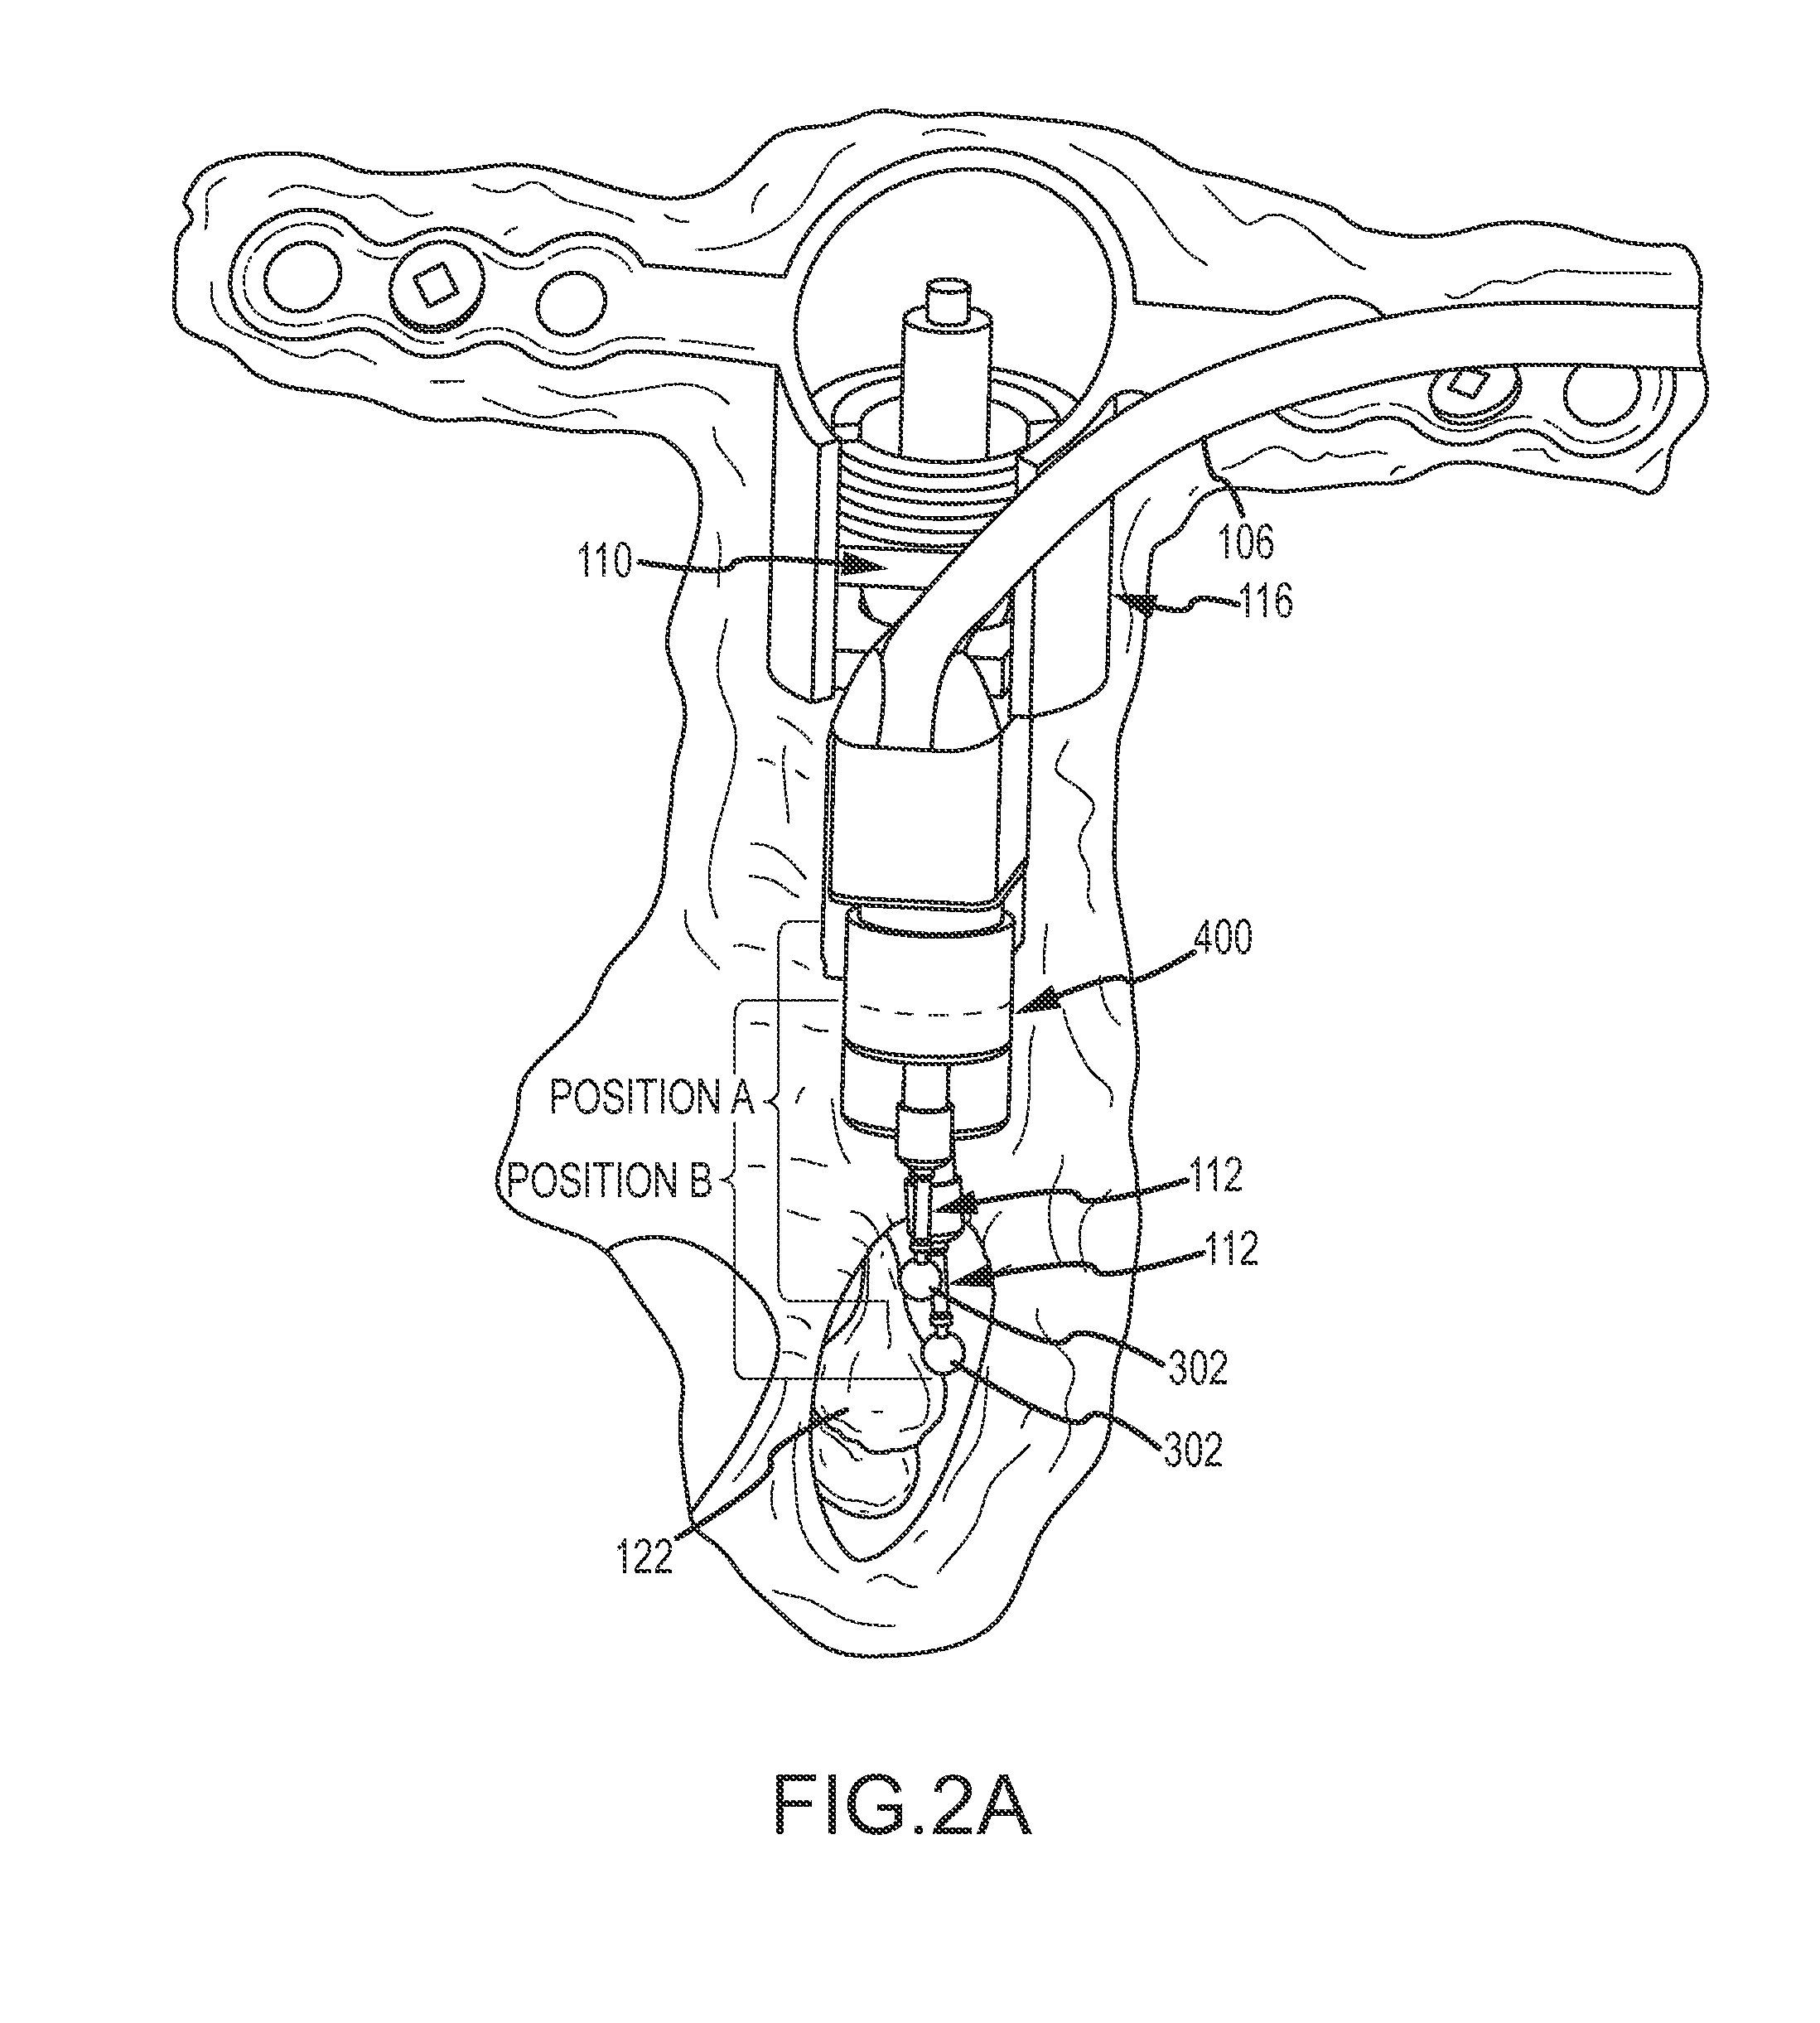 Lateral coupling of an implantable hearing aid actuator to an auditory component